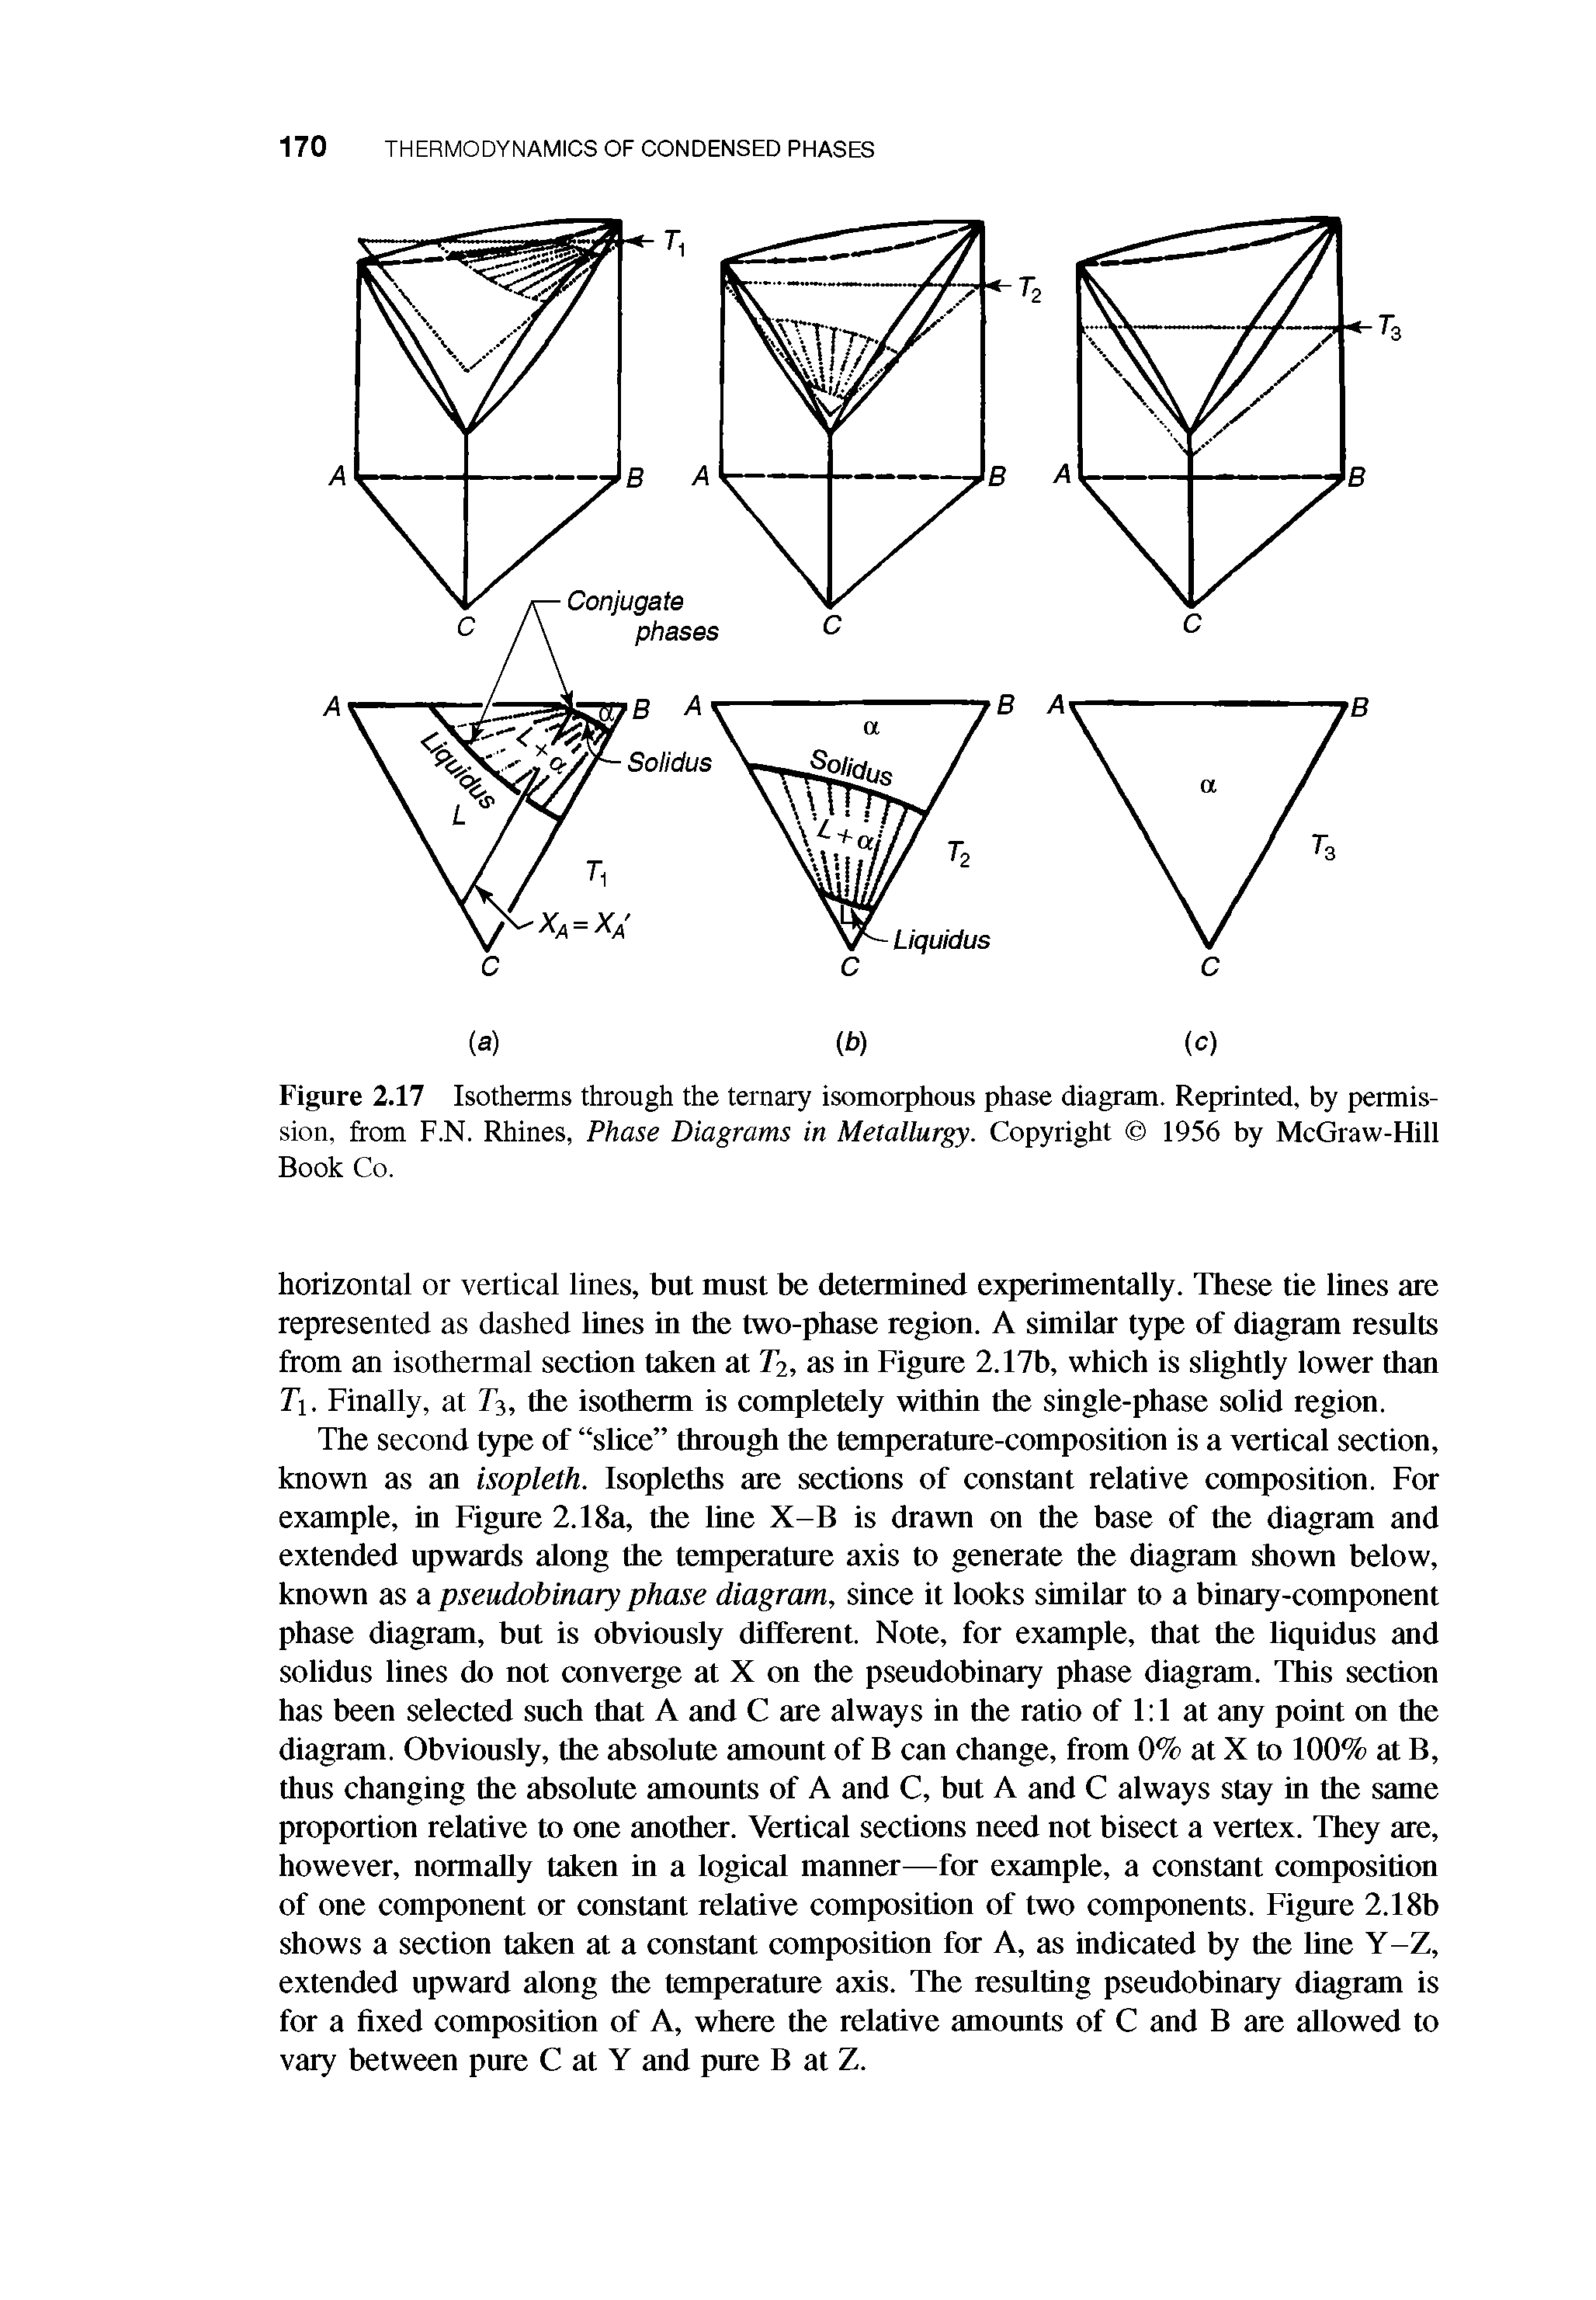 Figure 2.17 Isotherms through the ternary isomorphous phase diagram. Reprinted, by permission, from F.N. Rhines, Phase Diagrams in Metallurgy. Copyright 1956 by McGraw-Hill Book Co.